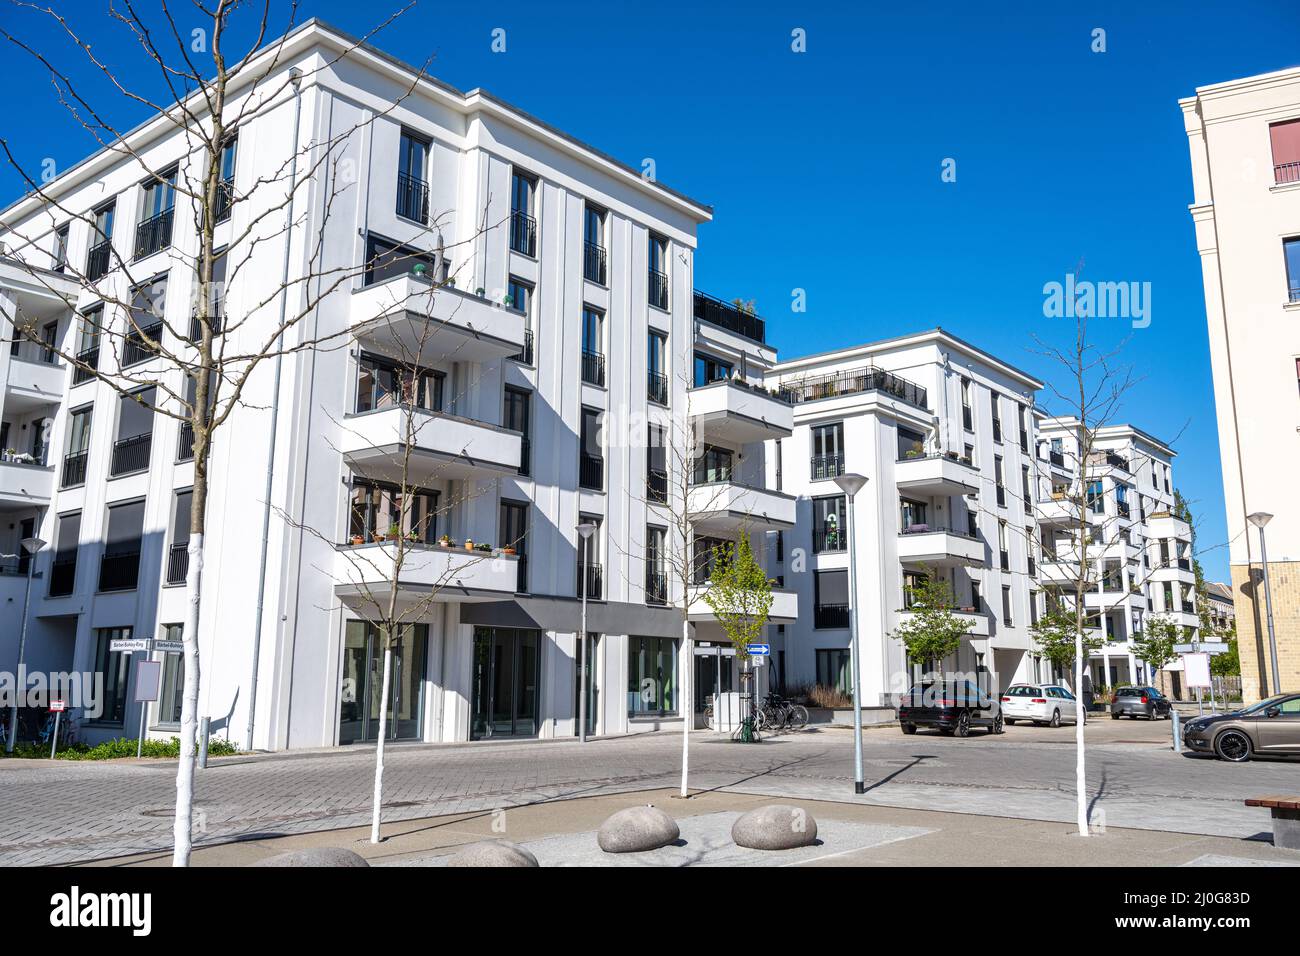 Housing development area with new apartment buildings seen in Berlin, Germany Stock Photo